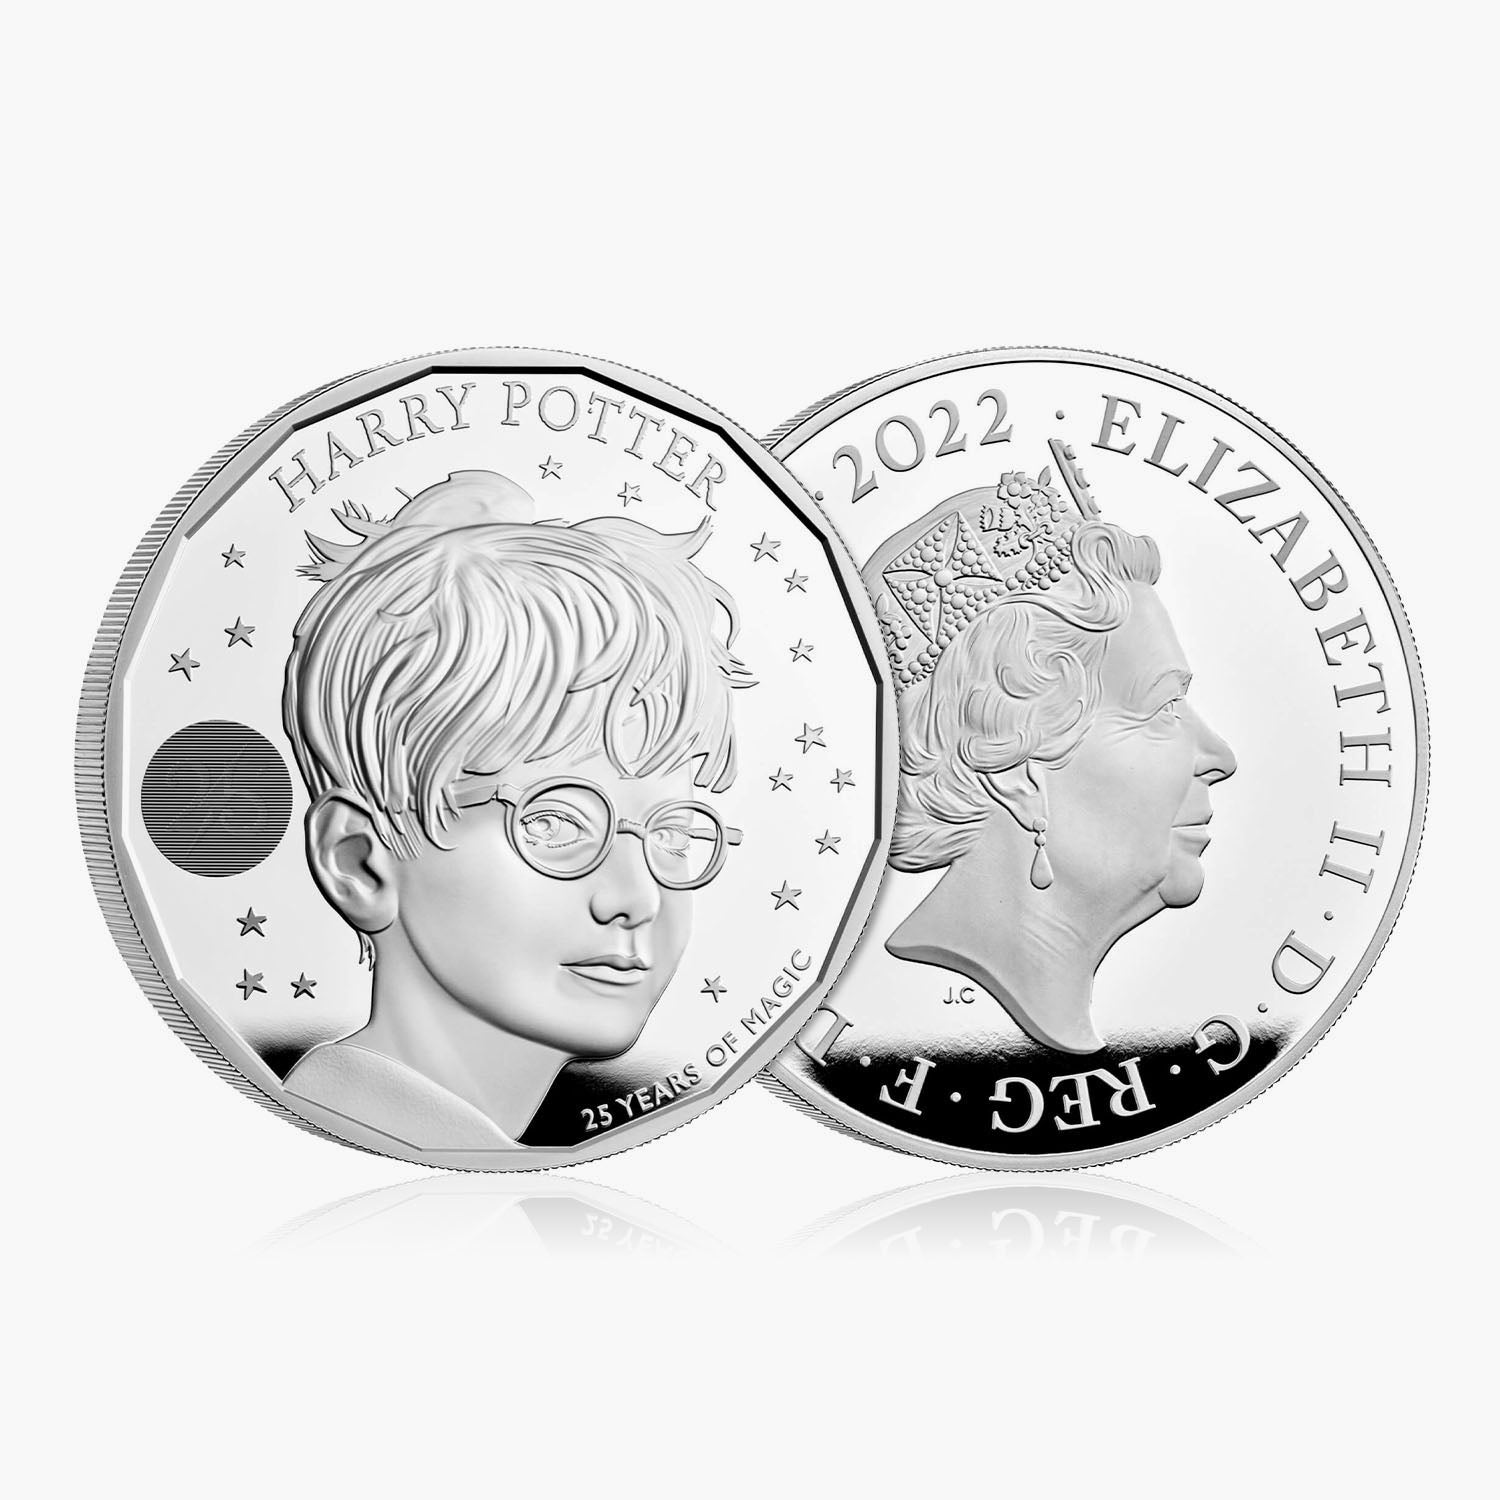 Harry Potter 2022 5oz Fine Silver Proof Coin